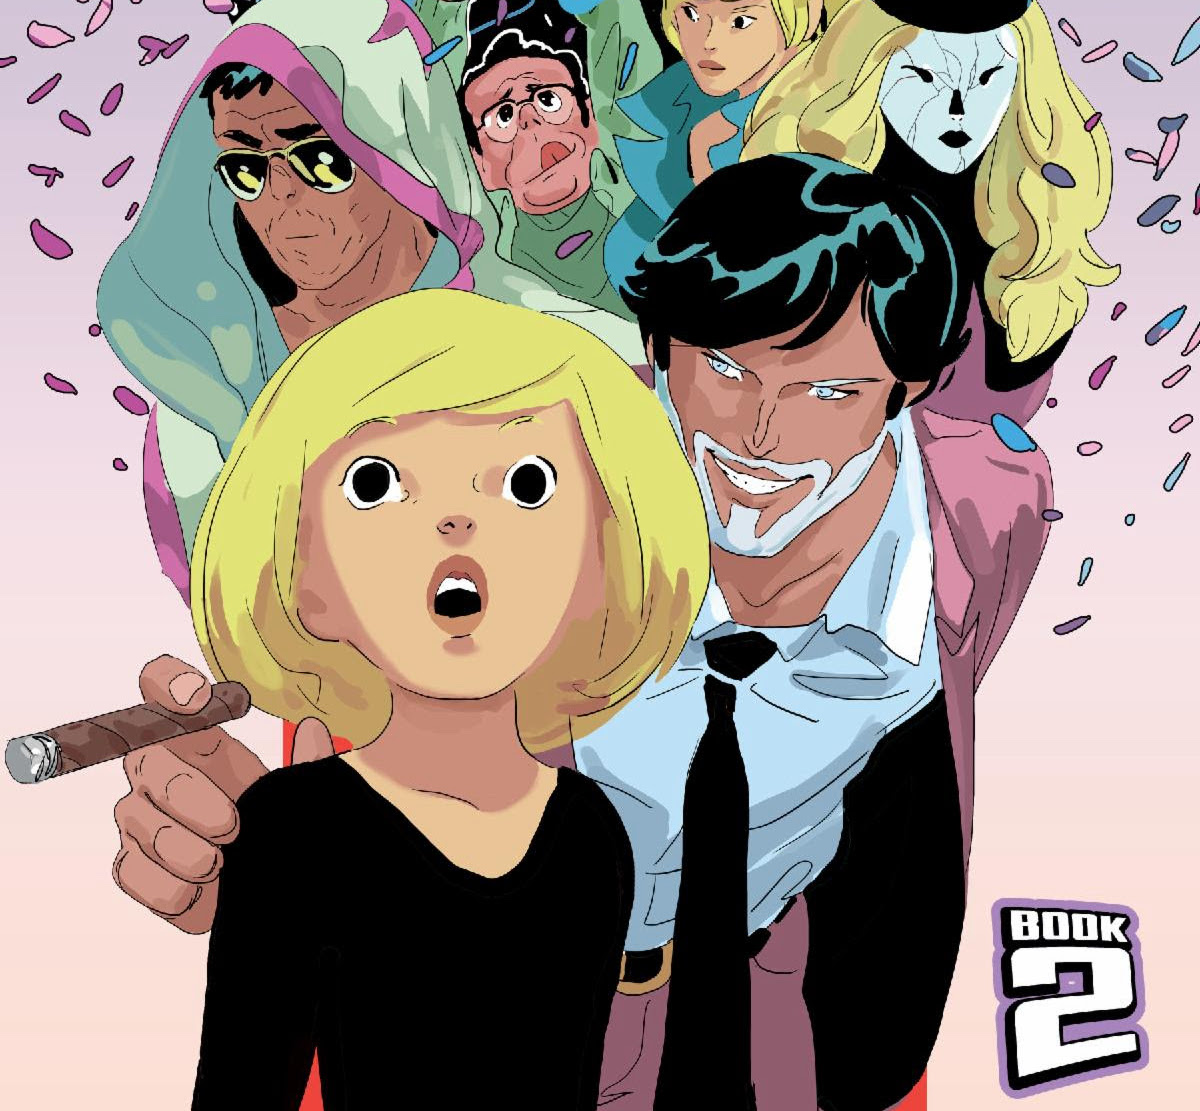 'Lastman' remastered Book 2 coming March 2023